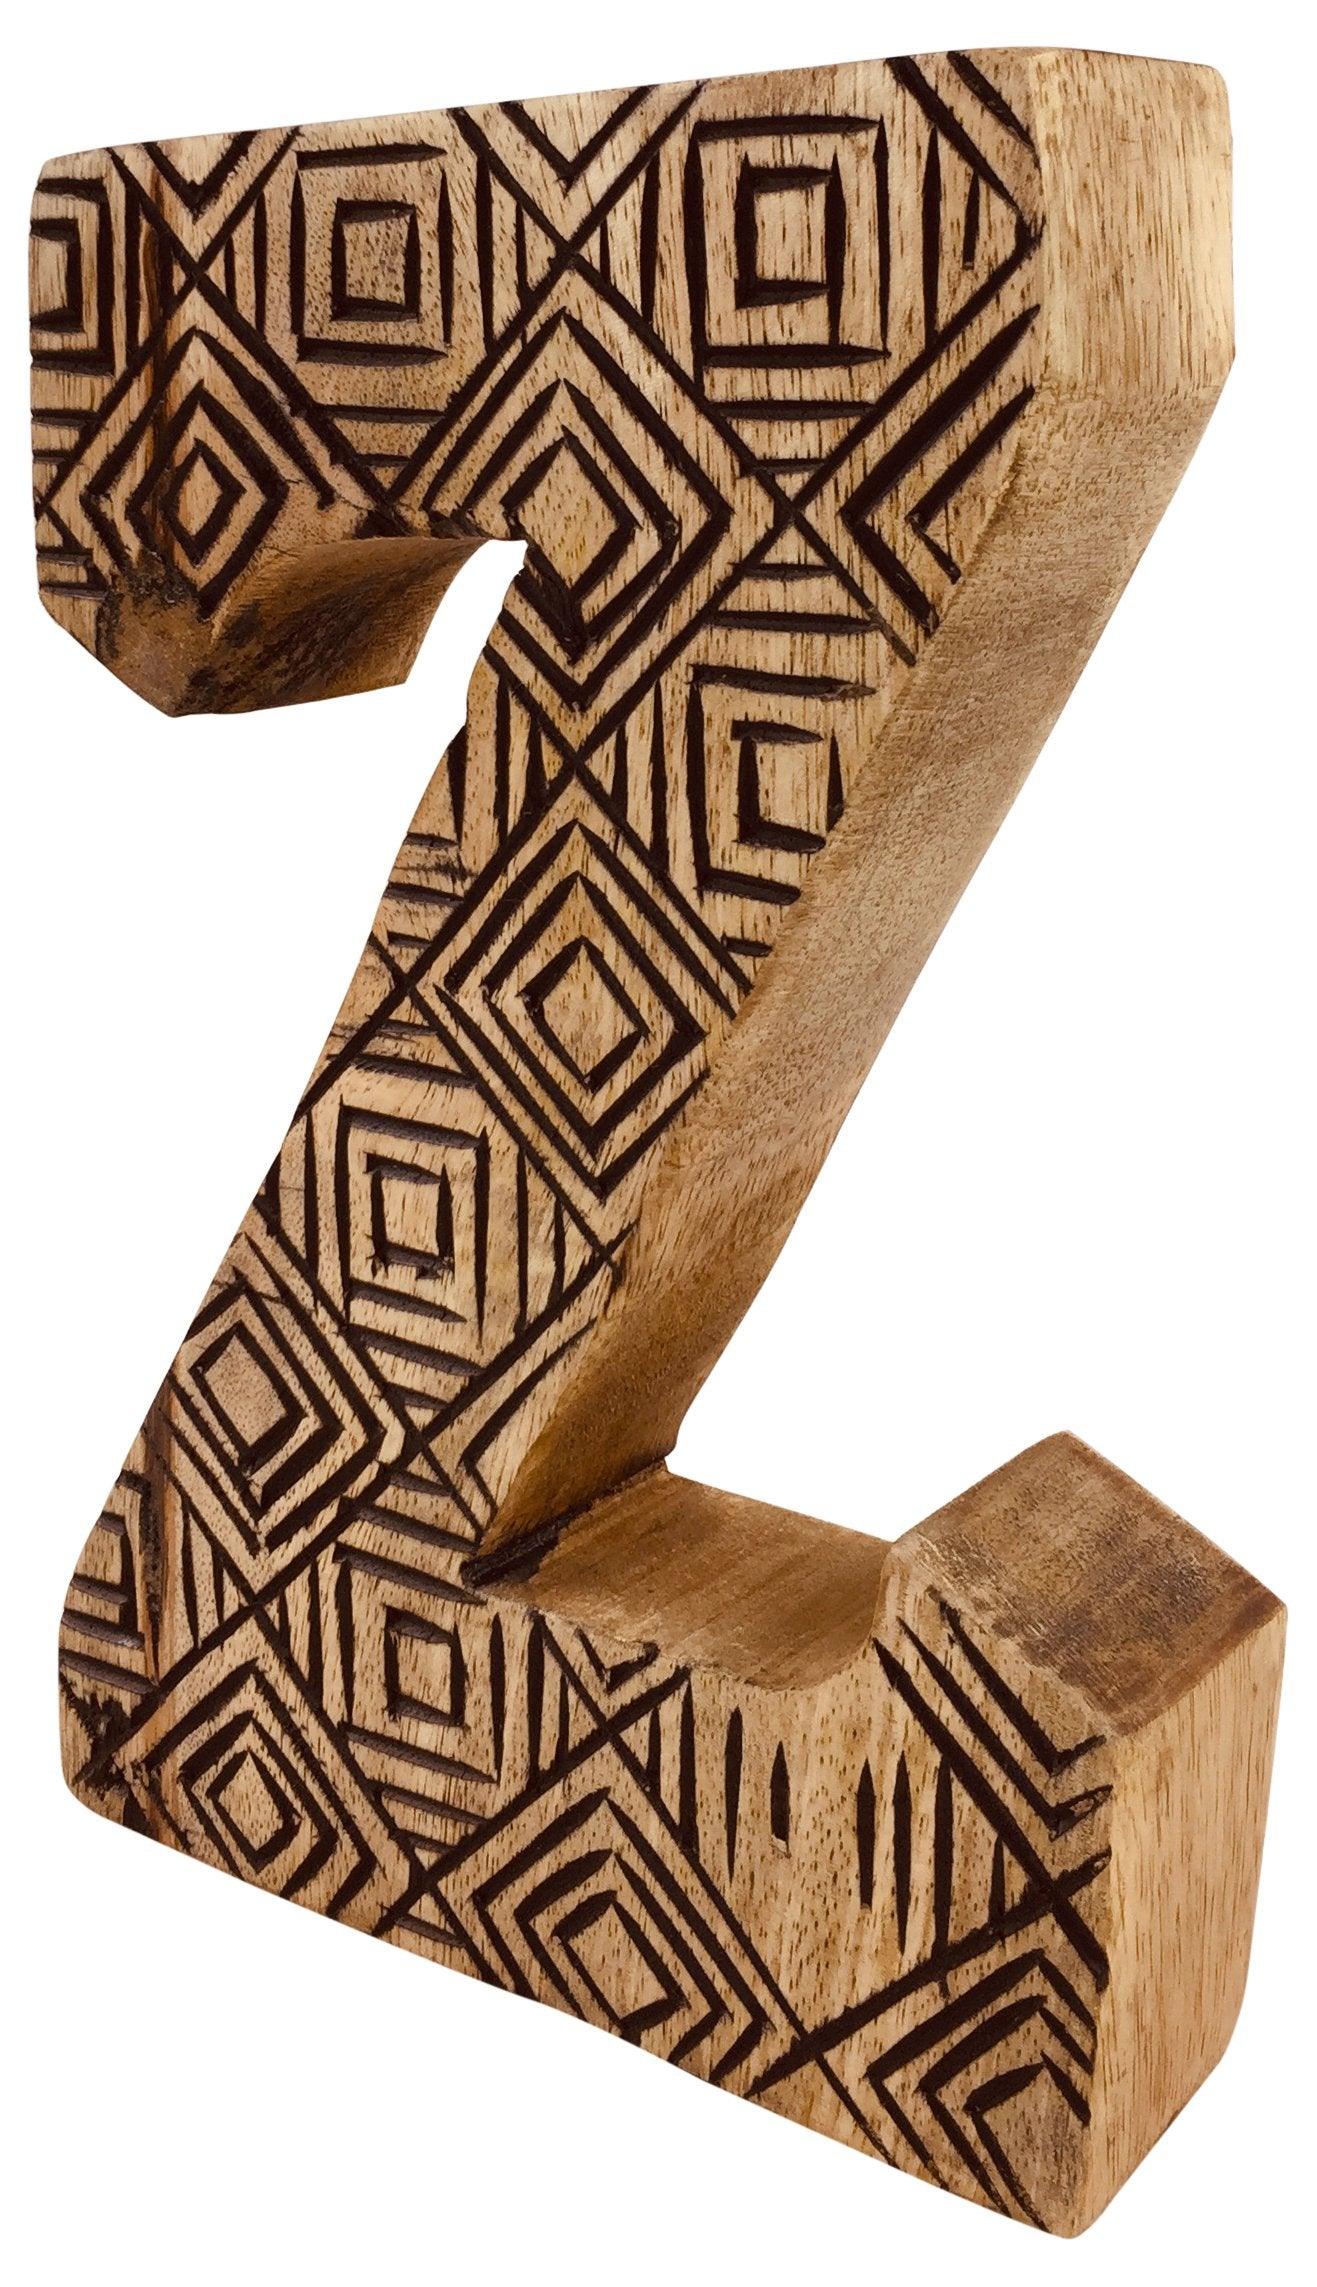 View Hand Carved Wooden Geometric Letter Z information